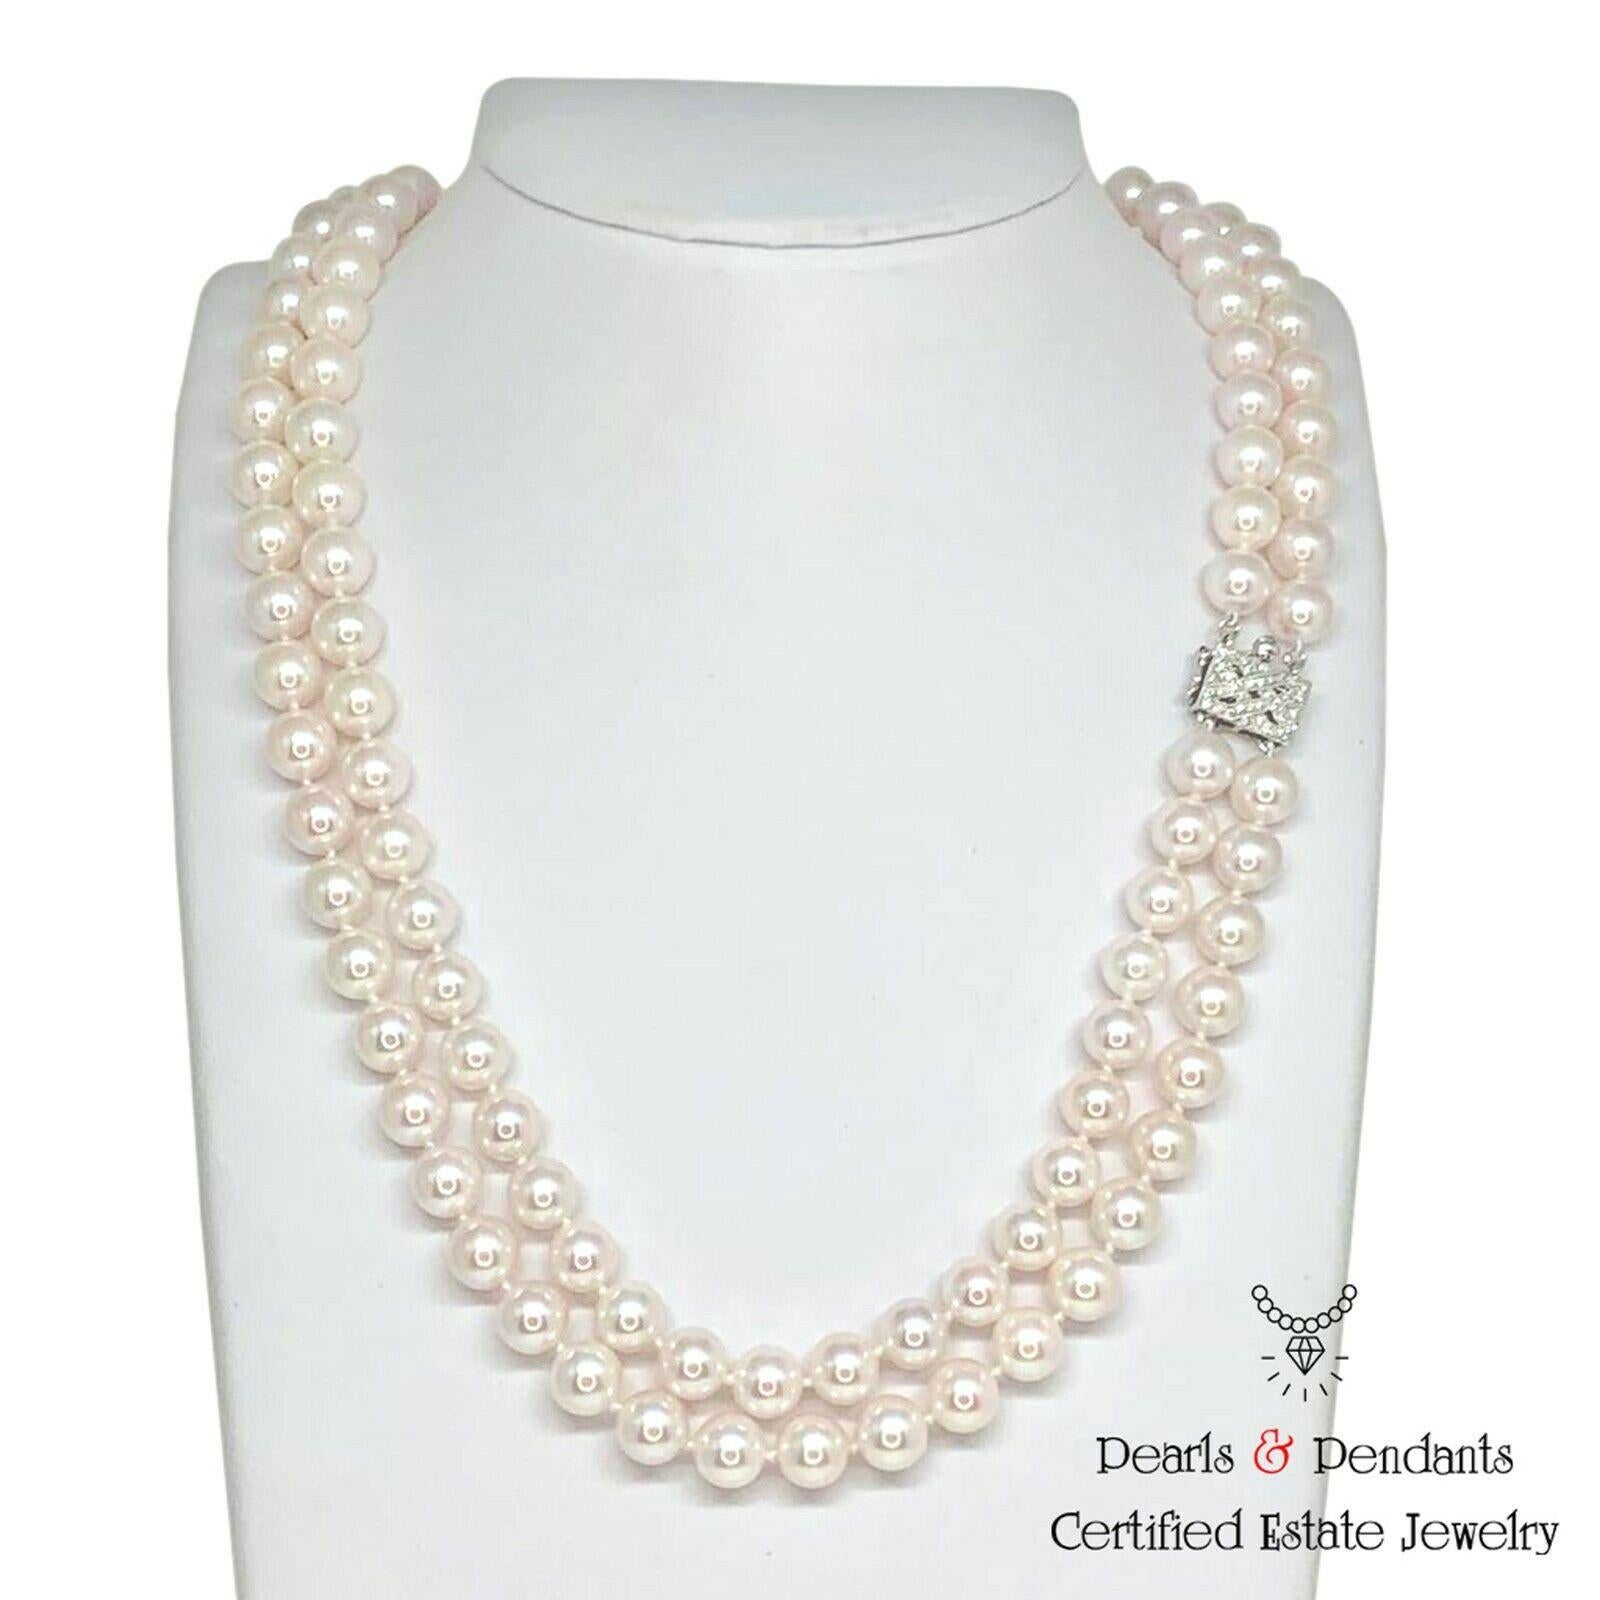 Fine Quality Akoya Pearl Diamond Necklace 8 mm 14k Gold 2-Strand Certified $9,750 010928

This is a Unique Custom Made Glamorous Piece of Jewelry!

Nothing says, “I Love you” more than Diamonds and Pearls!

This Akoya pearl necklace has been